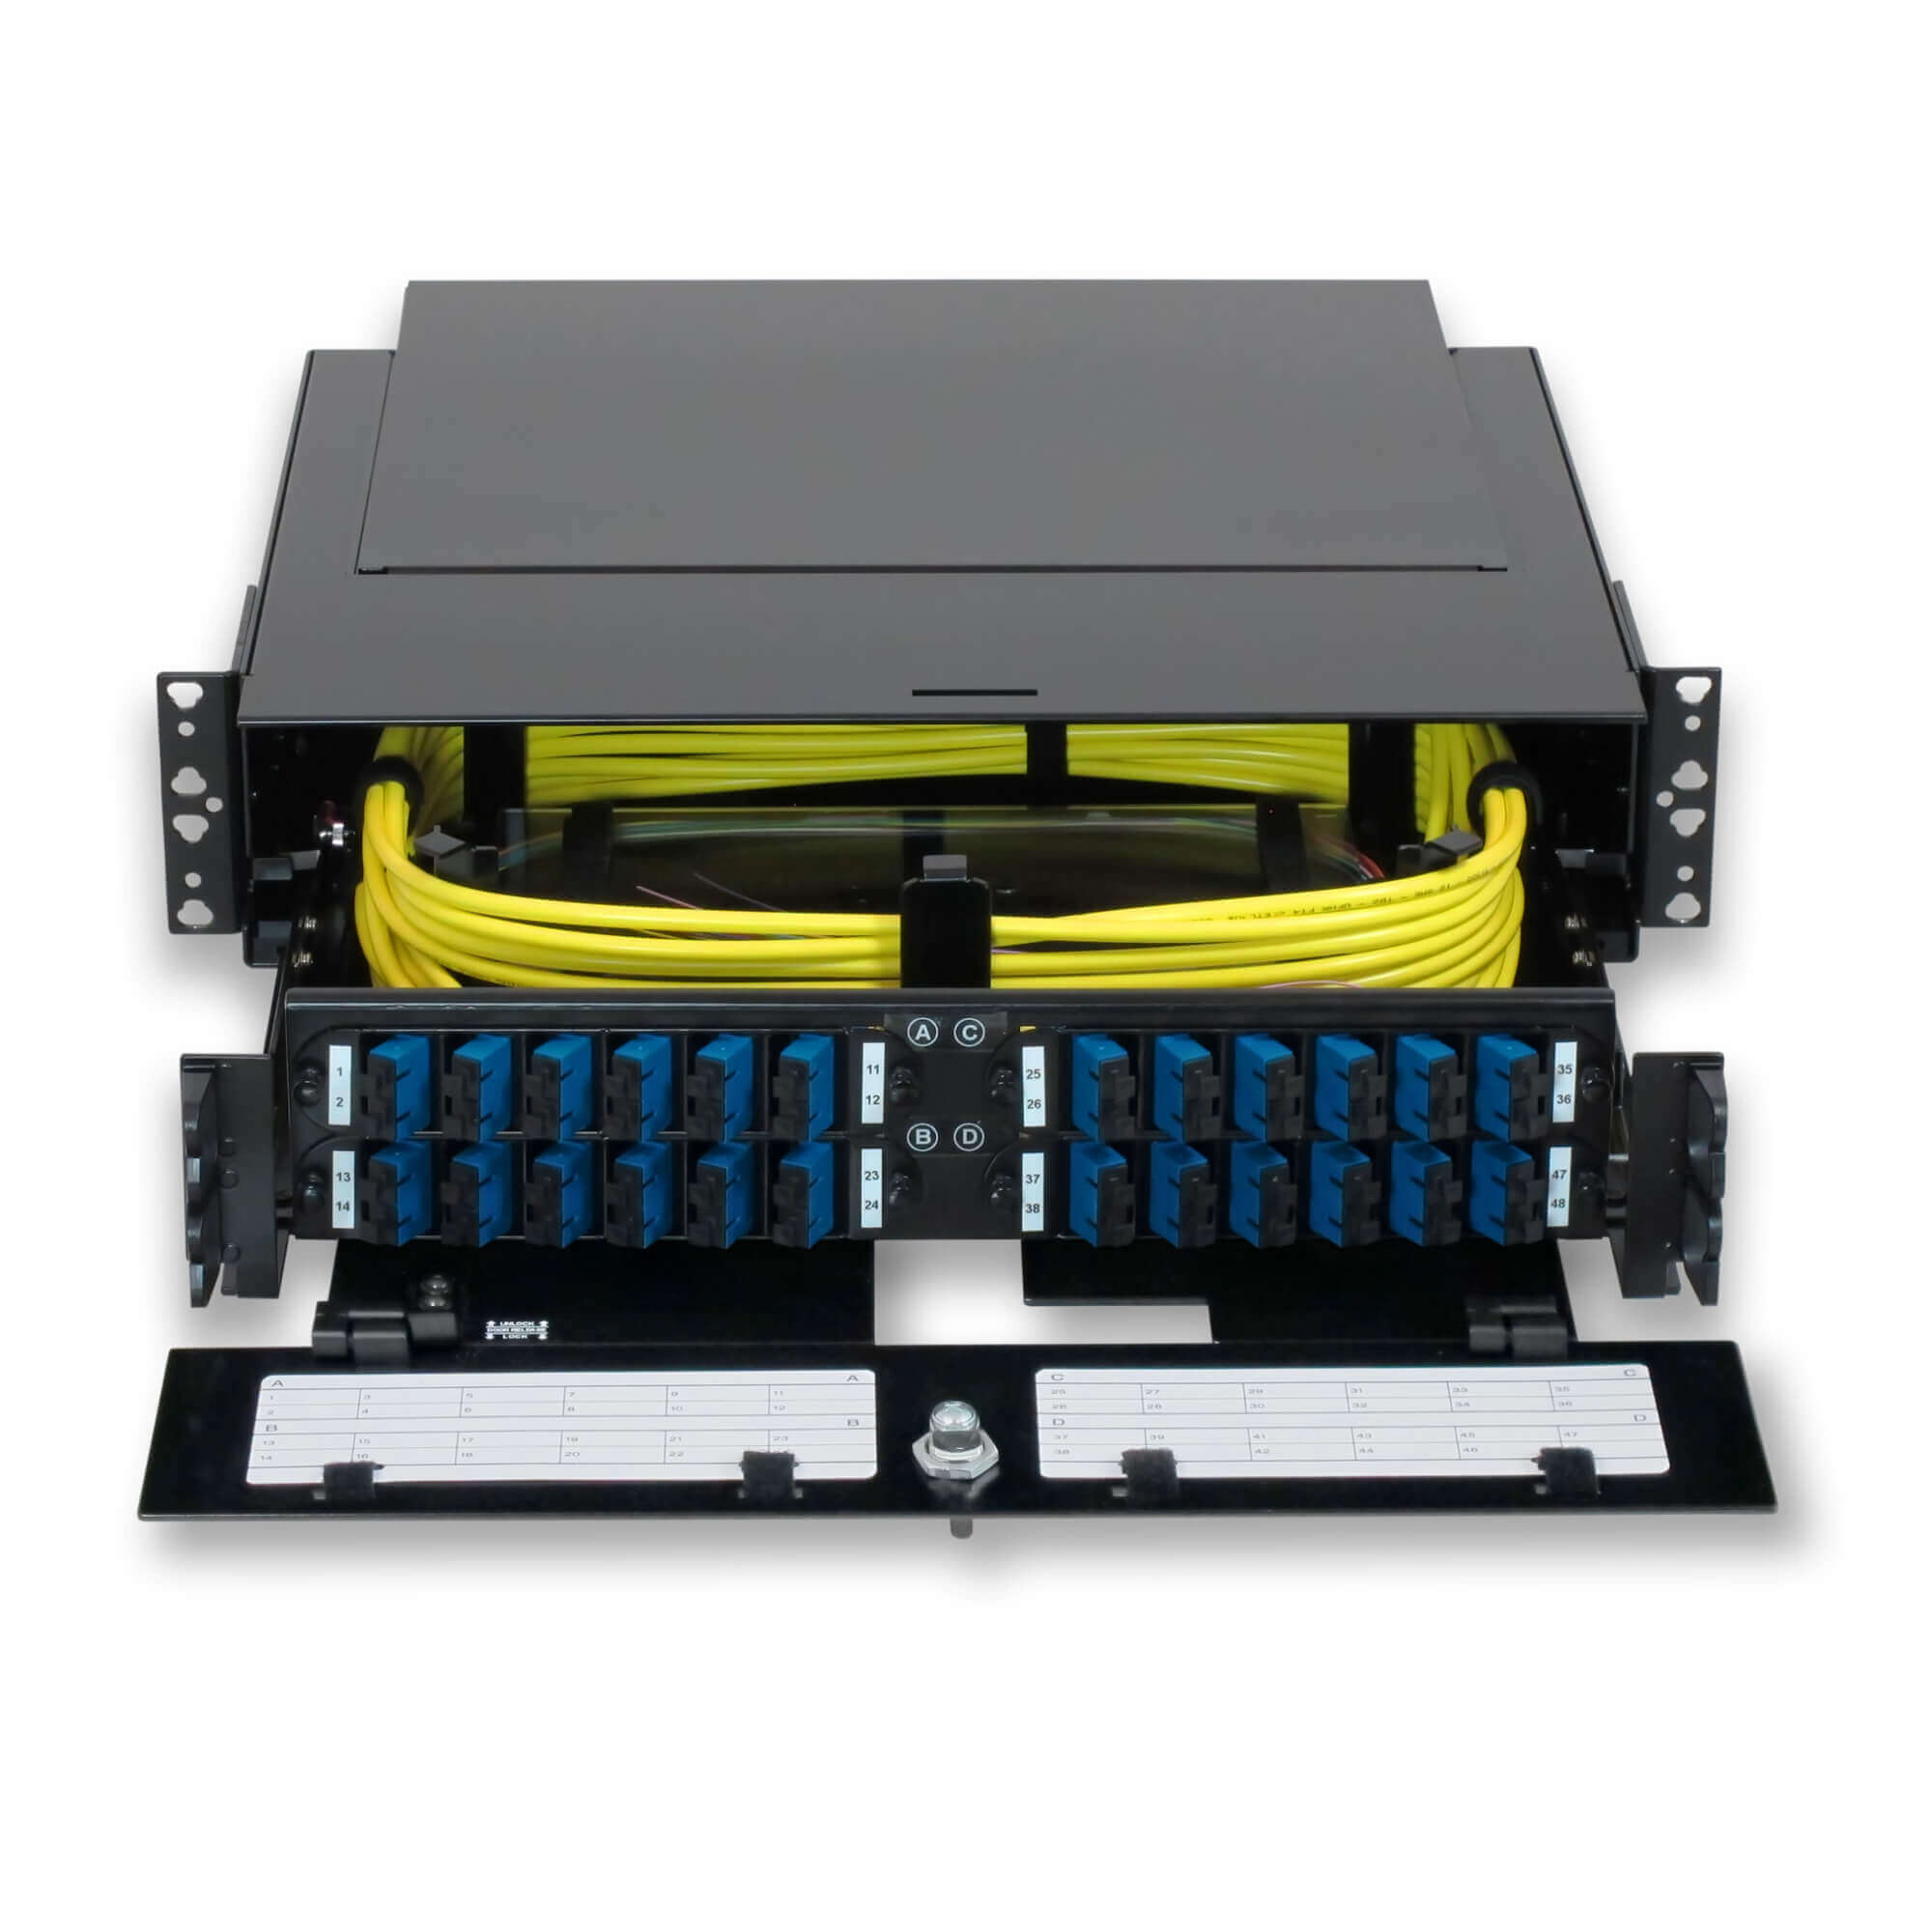 How To Use A Fiber Optic Patch Panel | vlr.eng.br